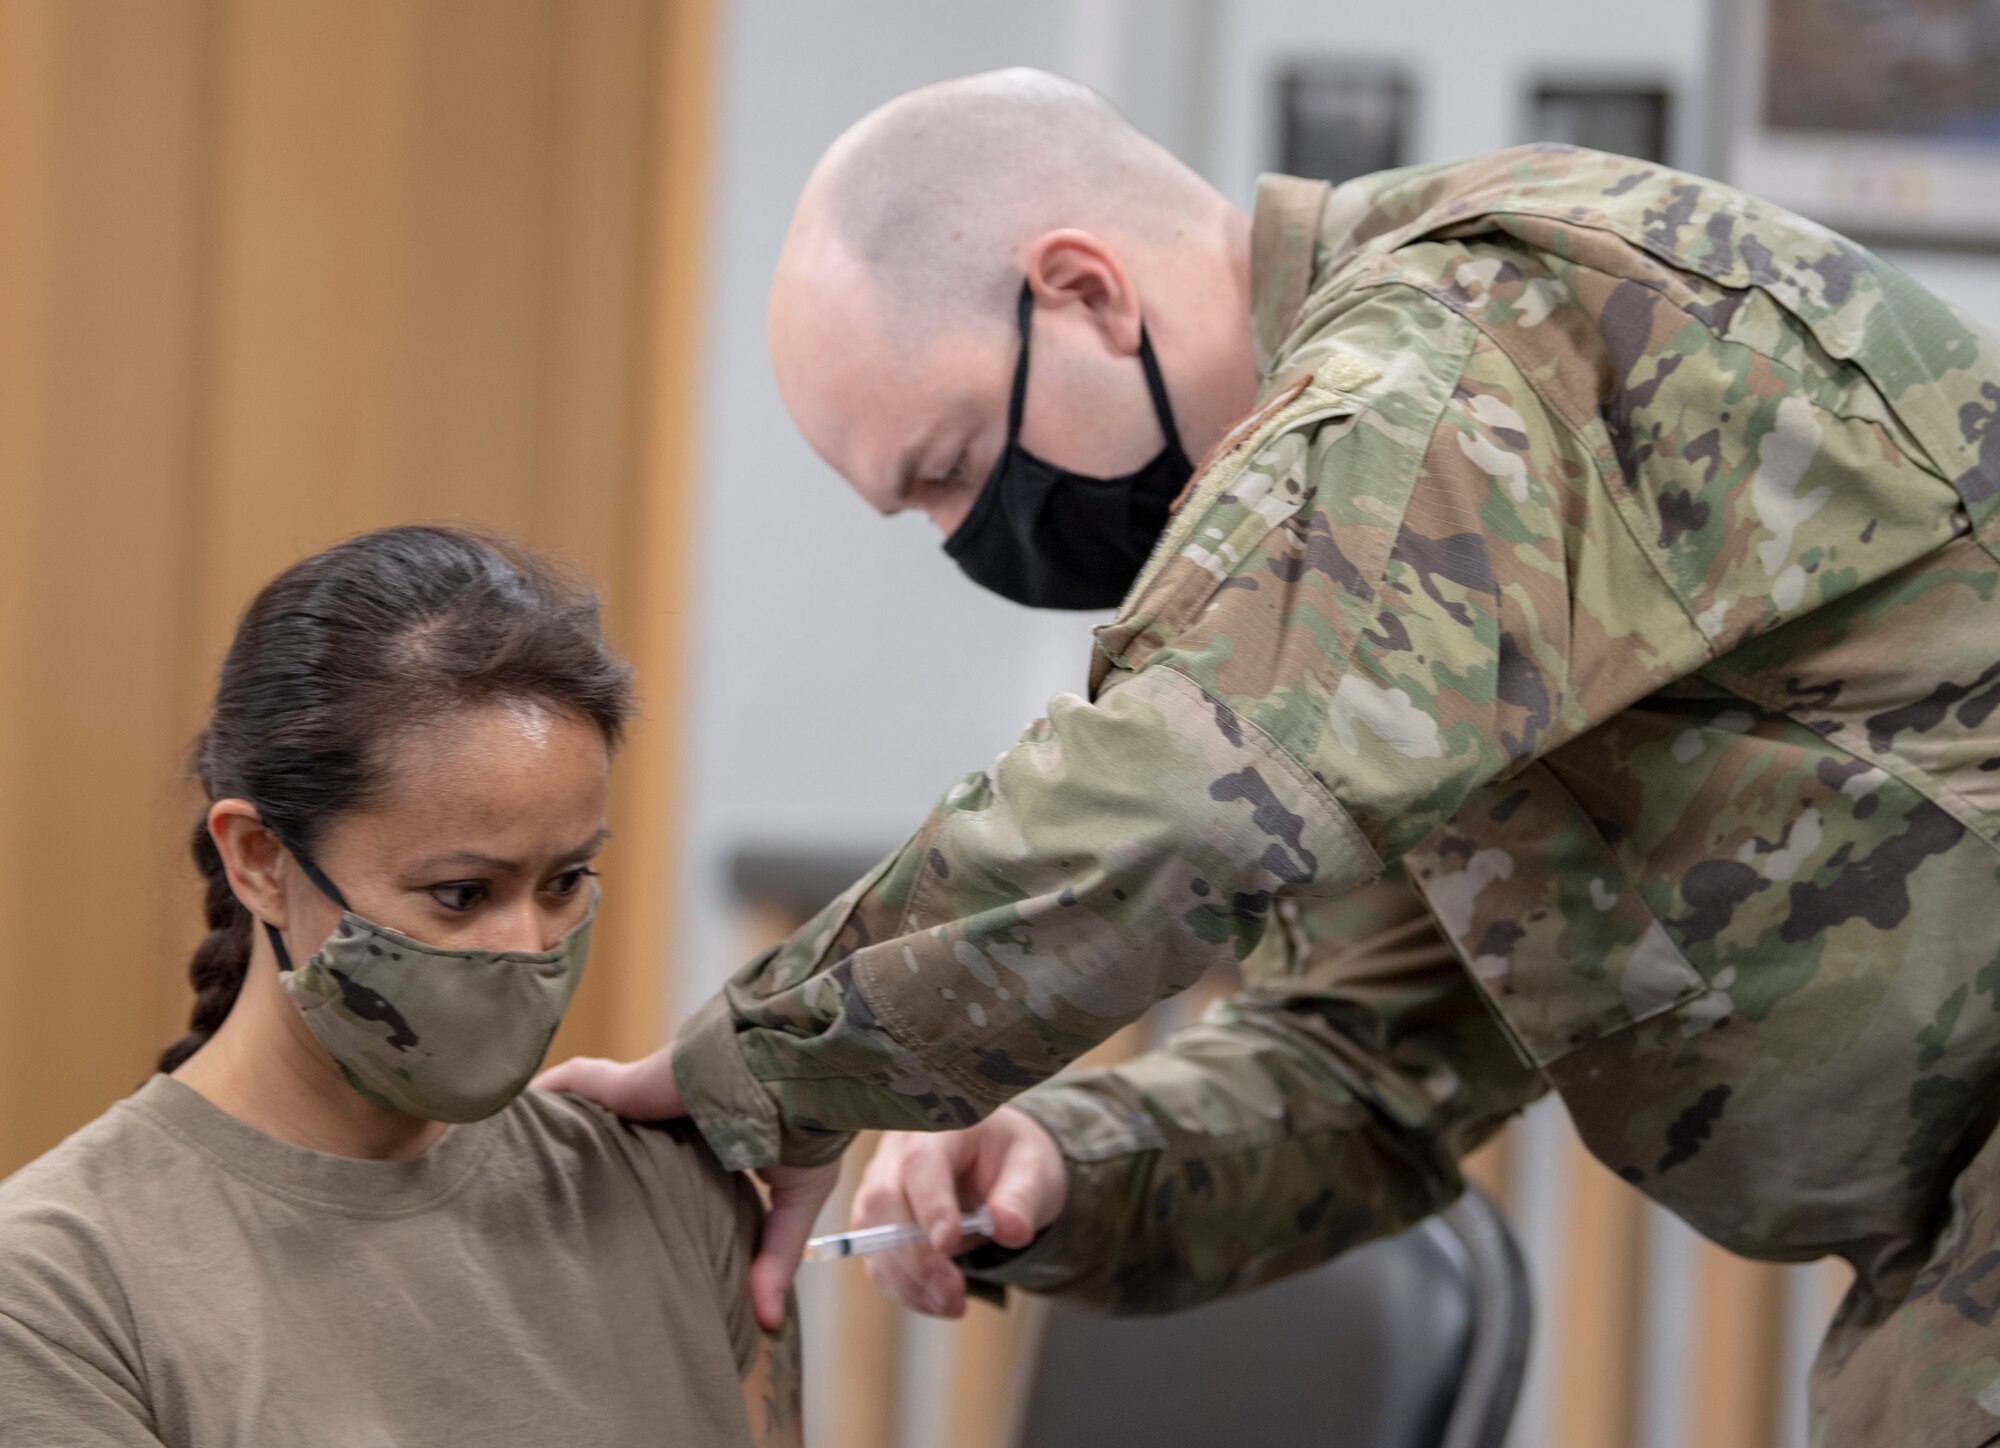 Tech. Sgt. Daniel Potter, 701st Munitions Maintenance Squadron independent duty medical technician (right), administers a COVID-19 vaccine to Capt. Michelle Angeles, 701st MUNSS Mission Support Flight commander, at Kleine Brogel Air Base, Belgium, March 19, 2021. IDMTs are responsible for having a broad spectrum of medical knowledge, and at remote units like Kleine Brogel, they act as the primary care provider for hundreds of Airmen. (U.S. Air Force photo by Senior Airman Alex Miller)